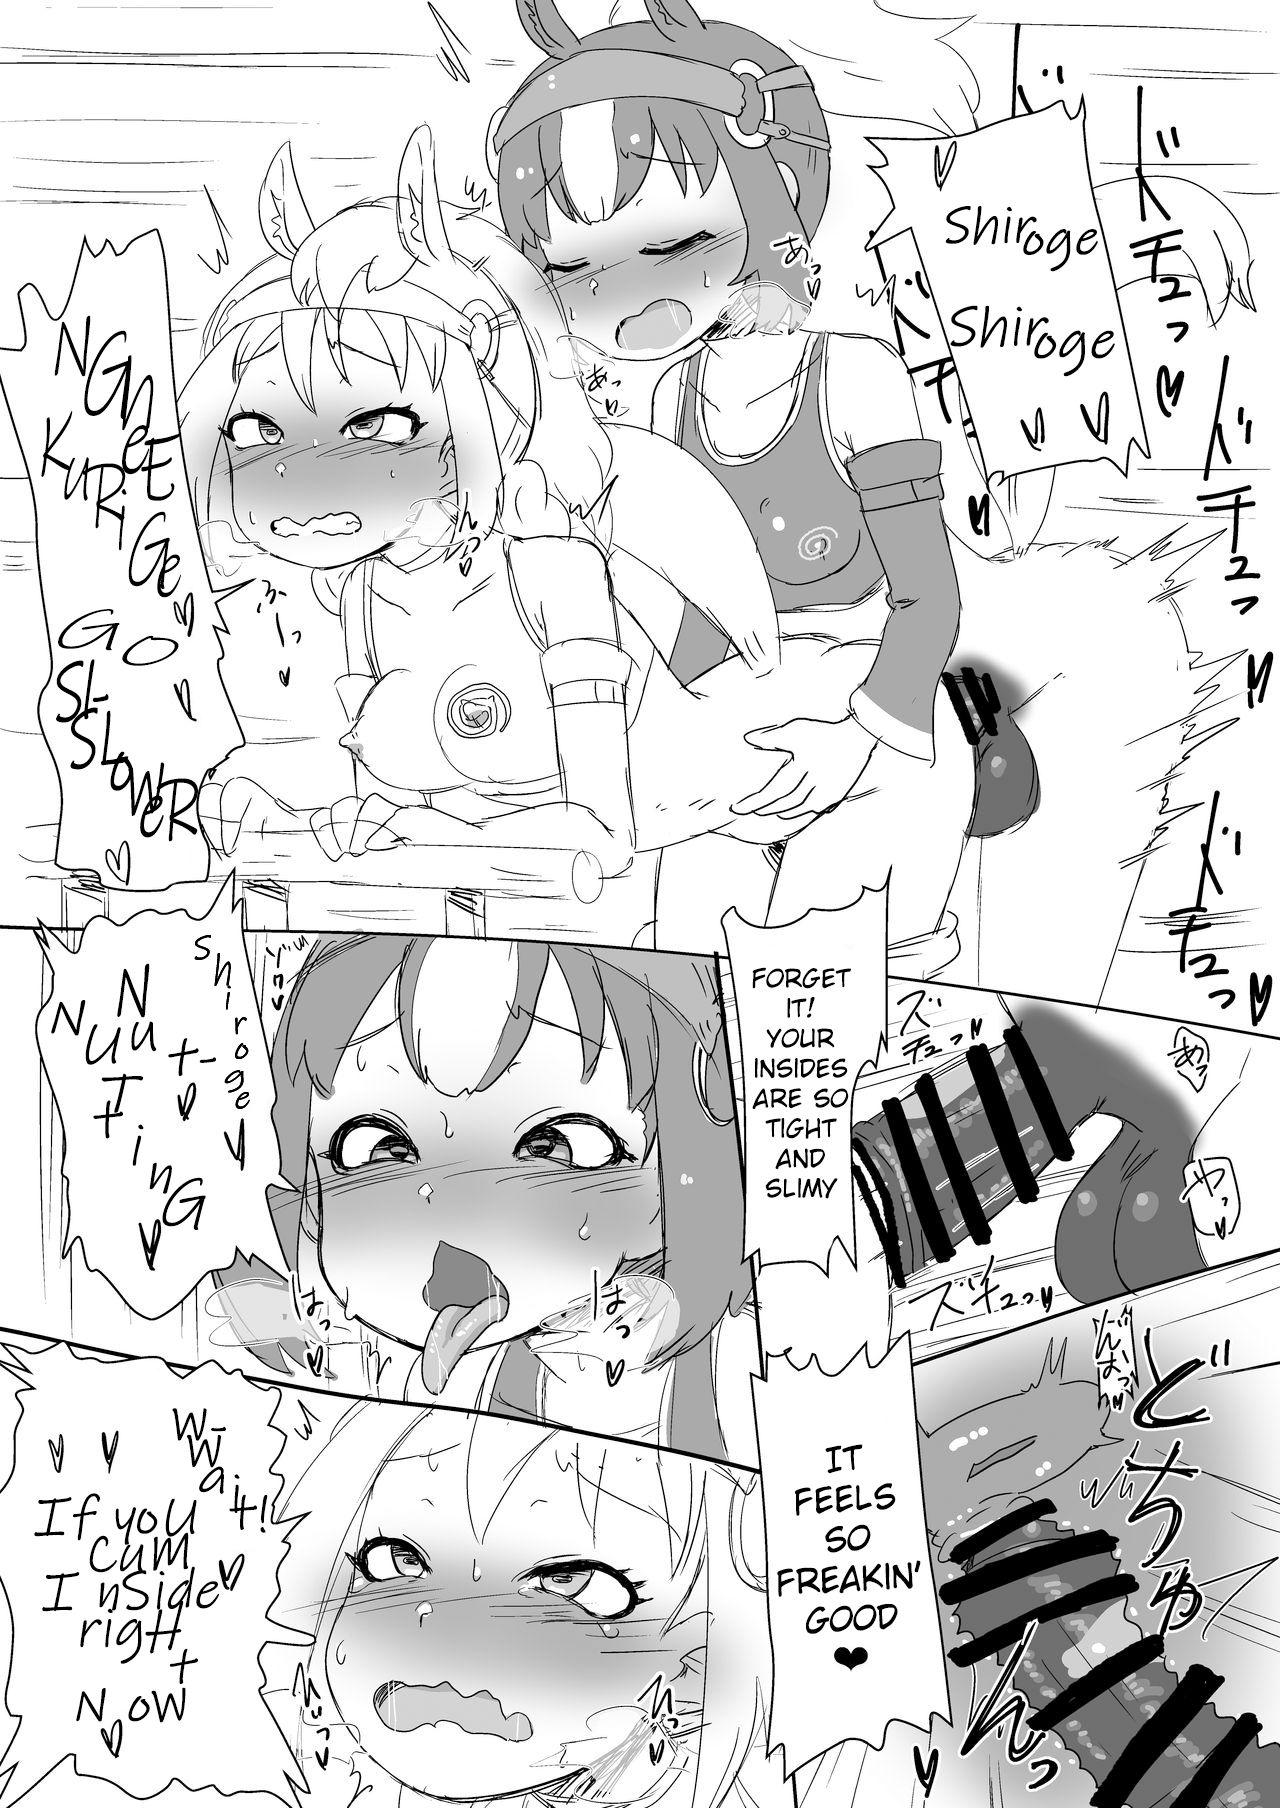 Special Locations Ten Takaku Thoroughbred Majiwaru Aki | The Sky Is High And The Thoroughbreds Are Copulating In Autumn - Kemono friends Big - Page 10